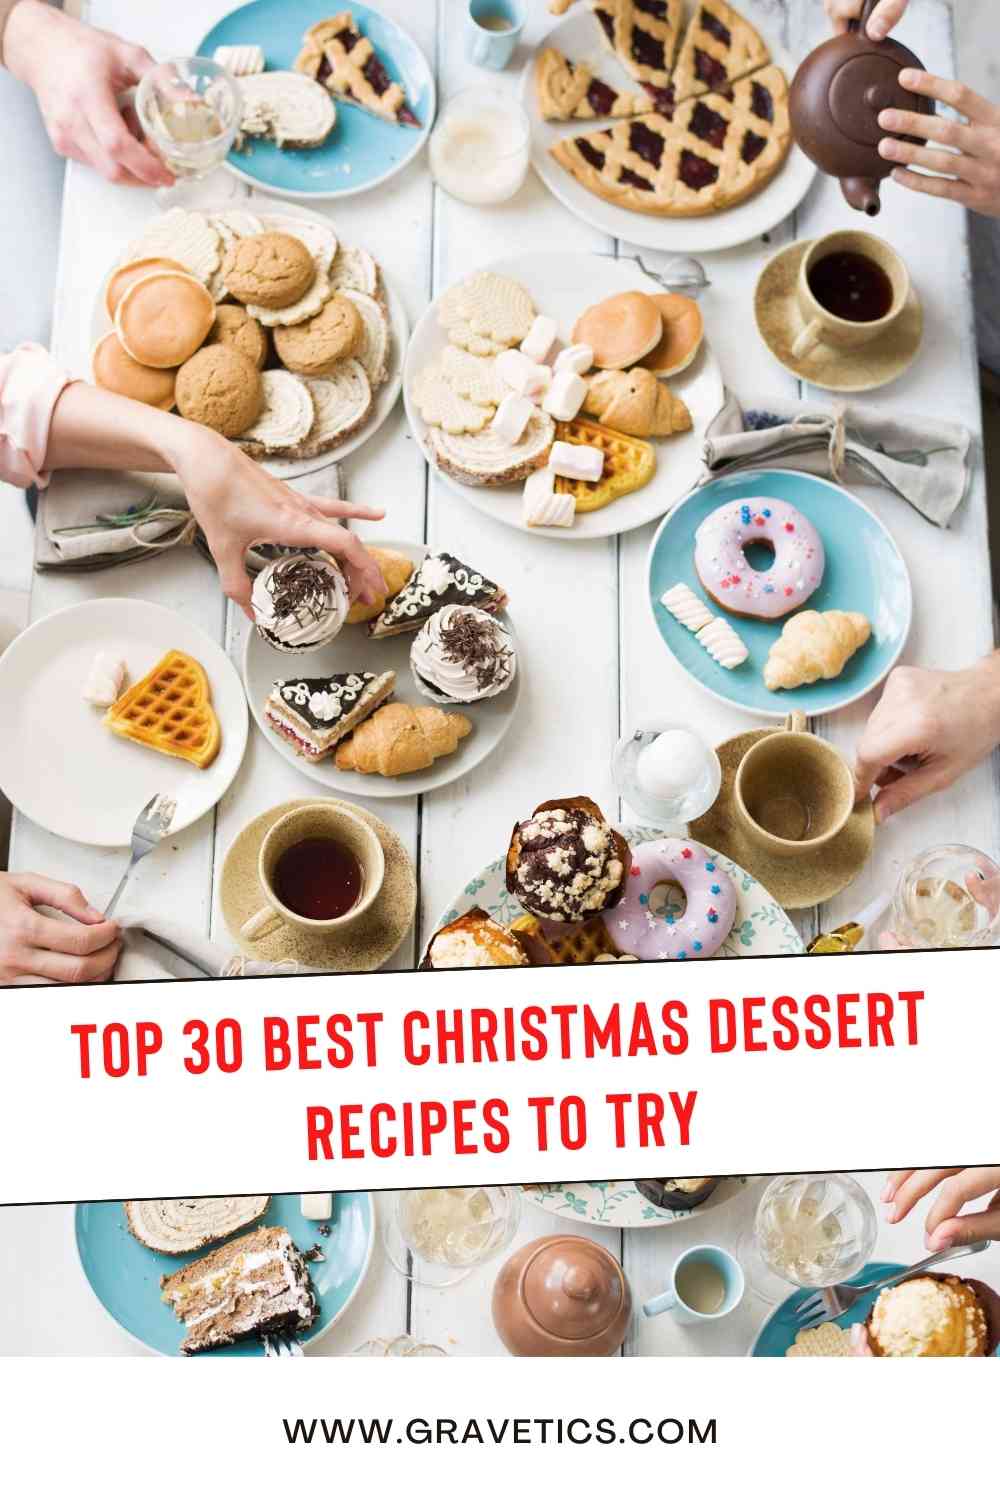 Top 30 Best Christmas Dessert Recipes To Try